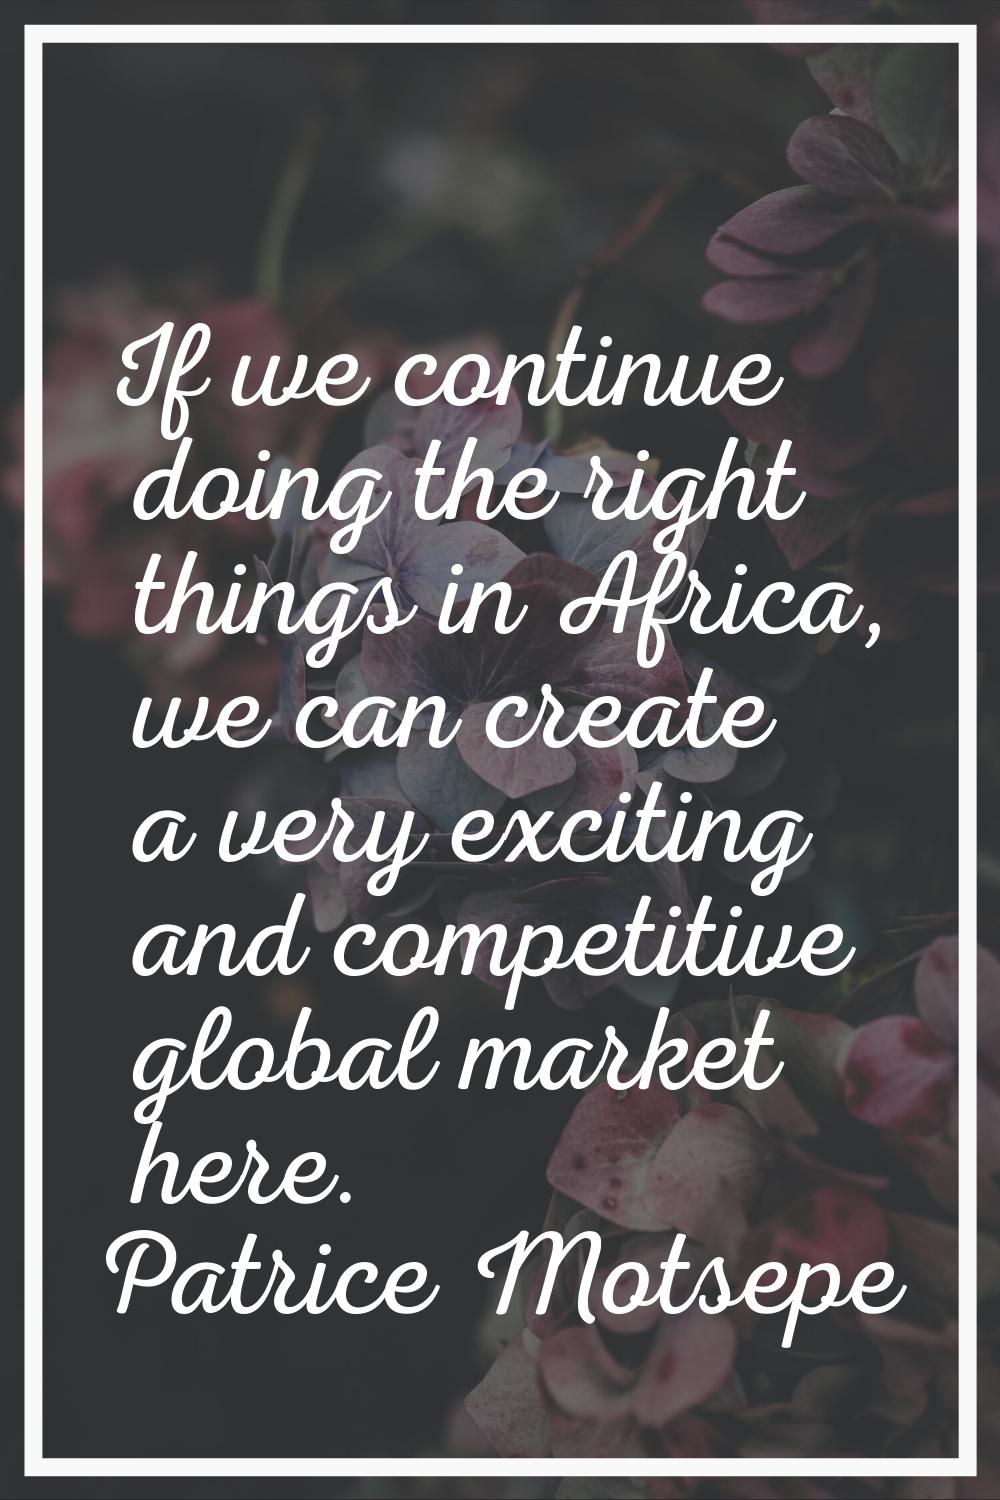 If we continue doing the right things in Africa, we can create a very exciting and competitive glob